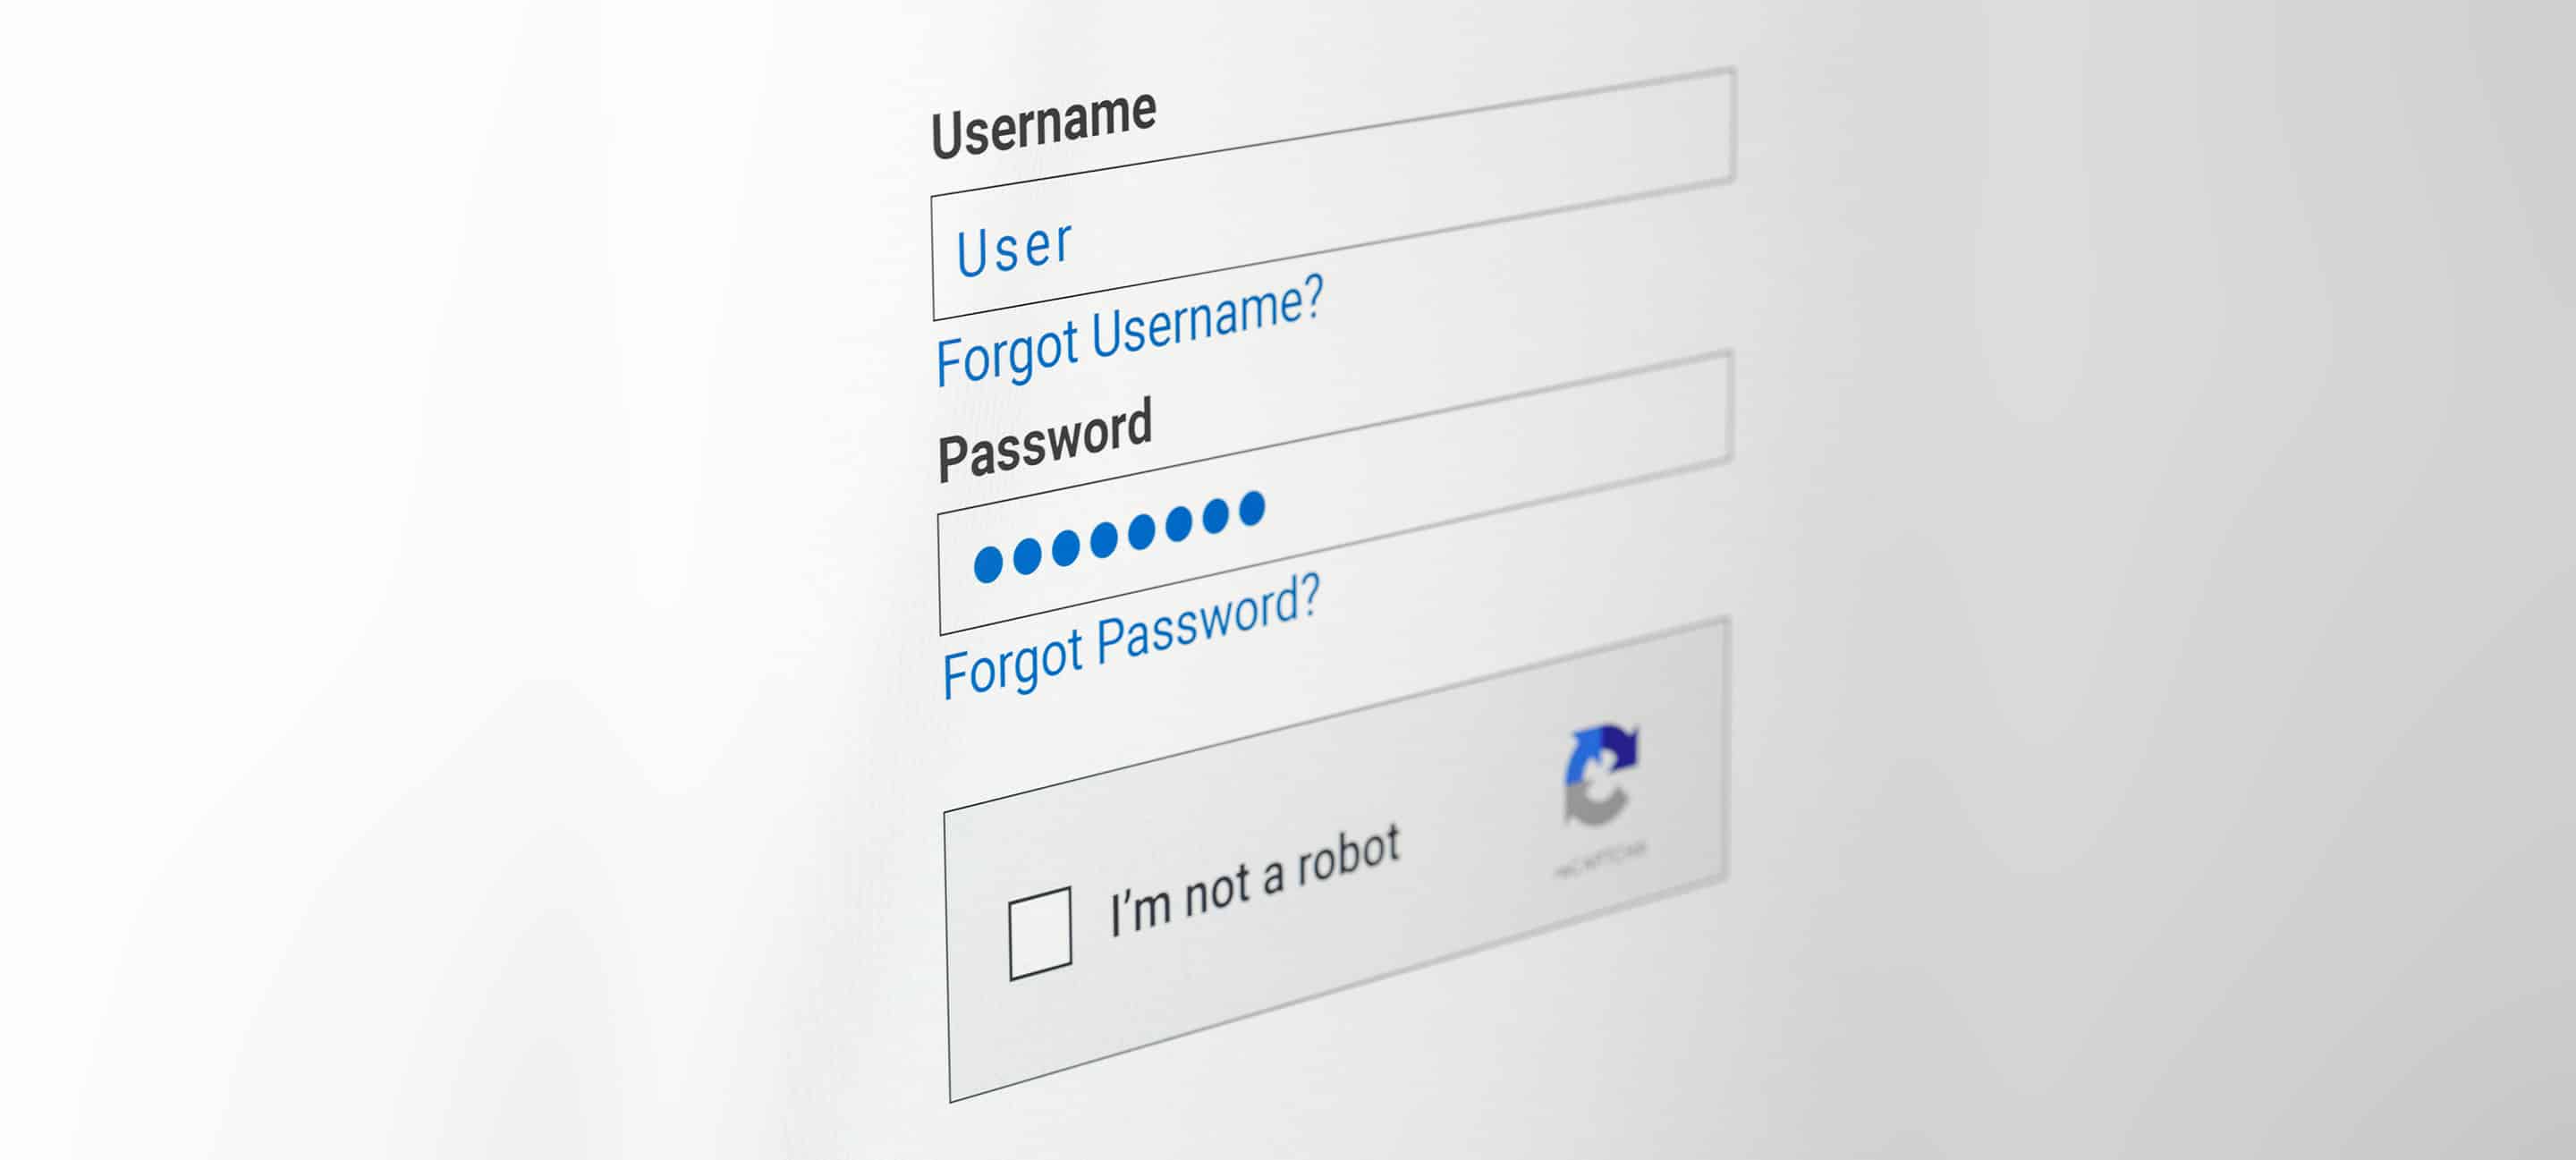 A screen prompts the user to answer a CAPTCHA test to log in to their account